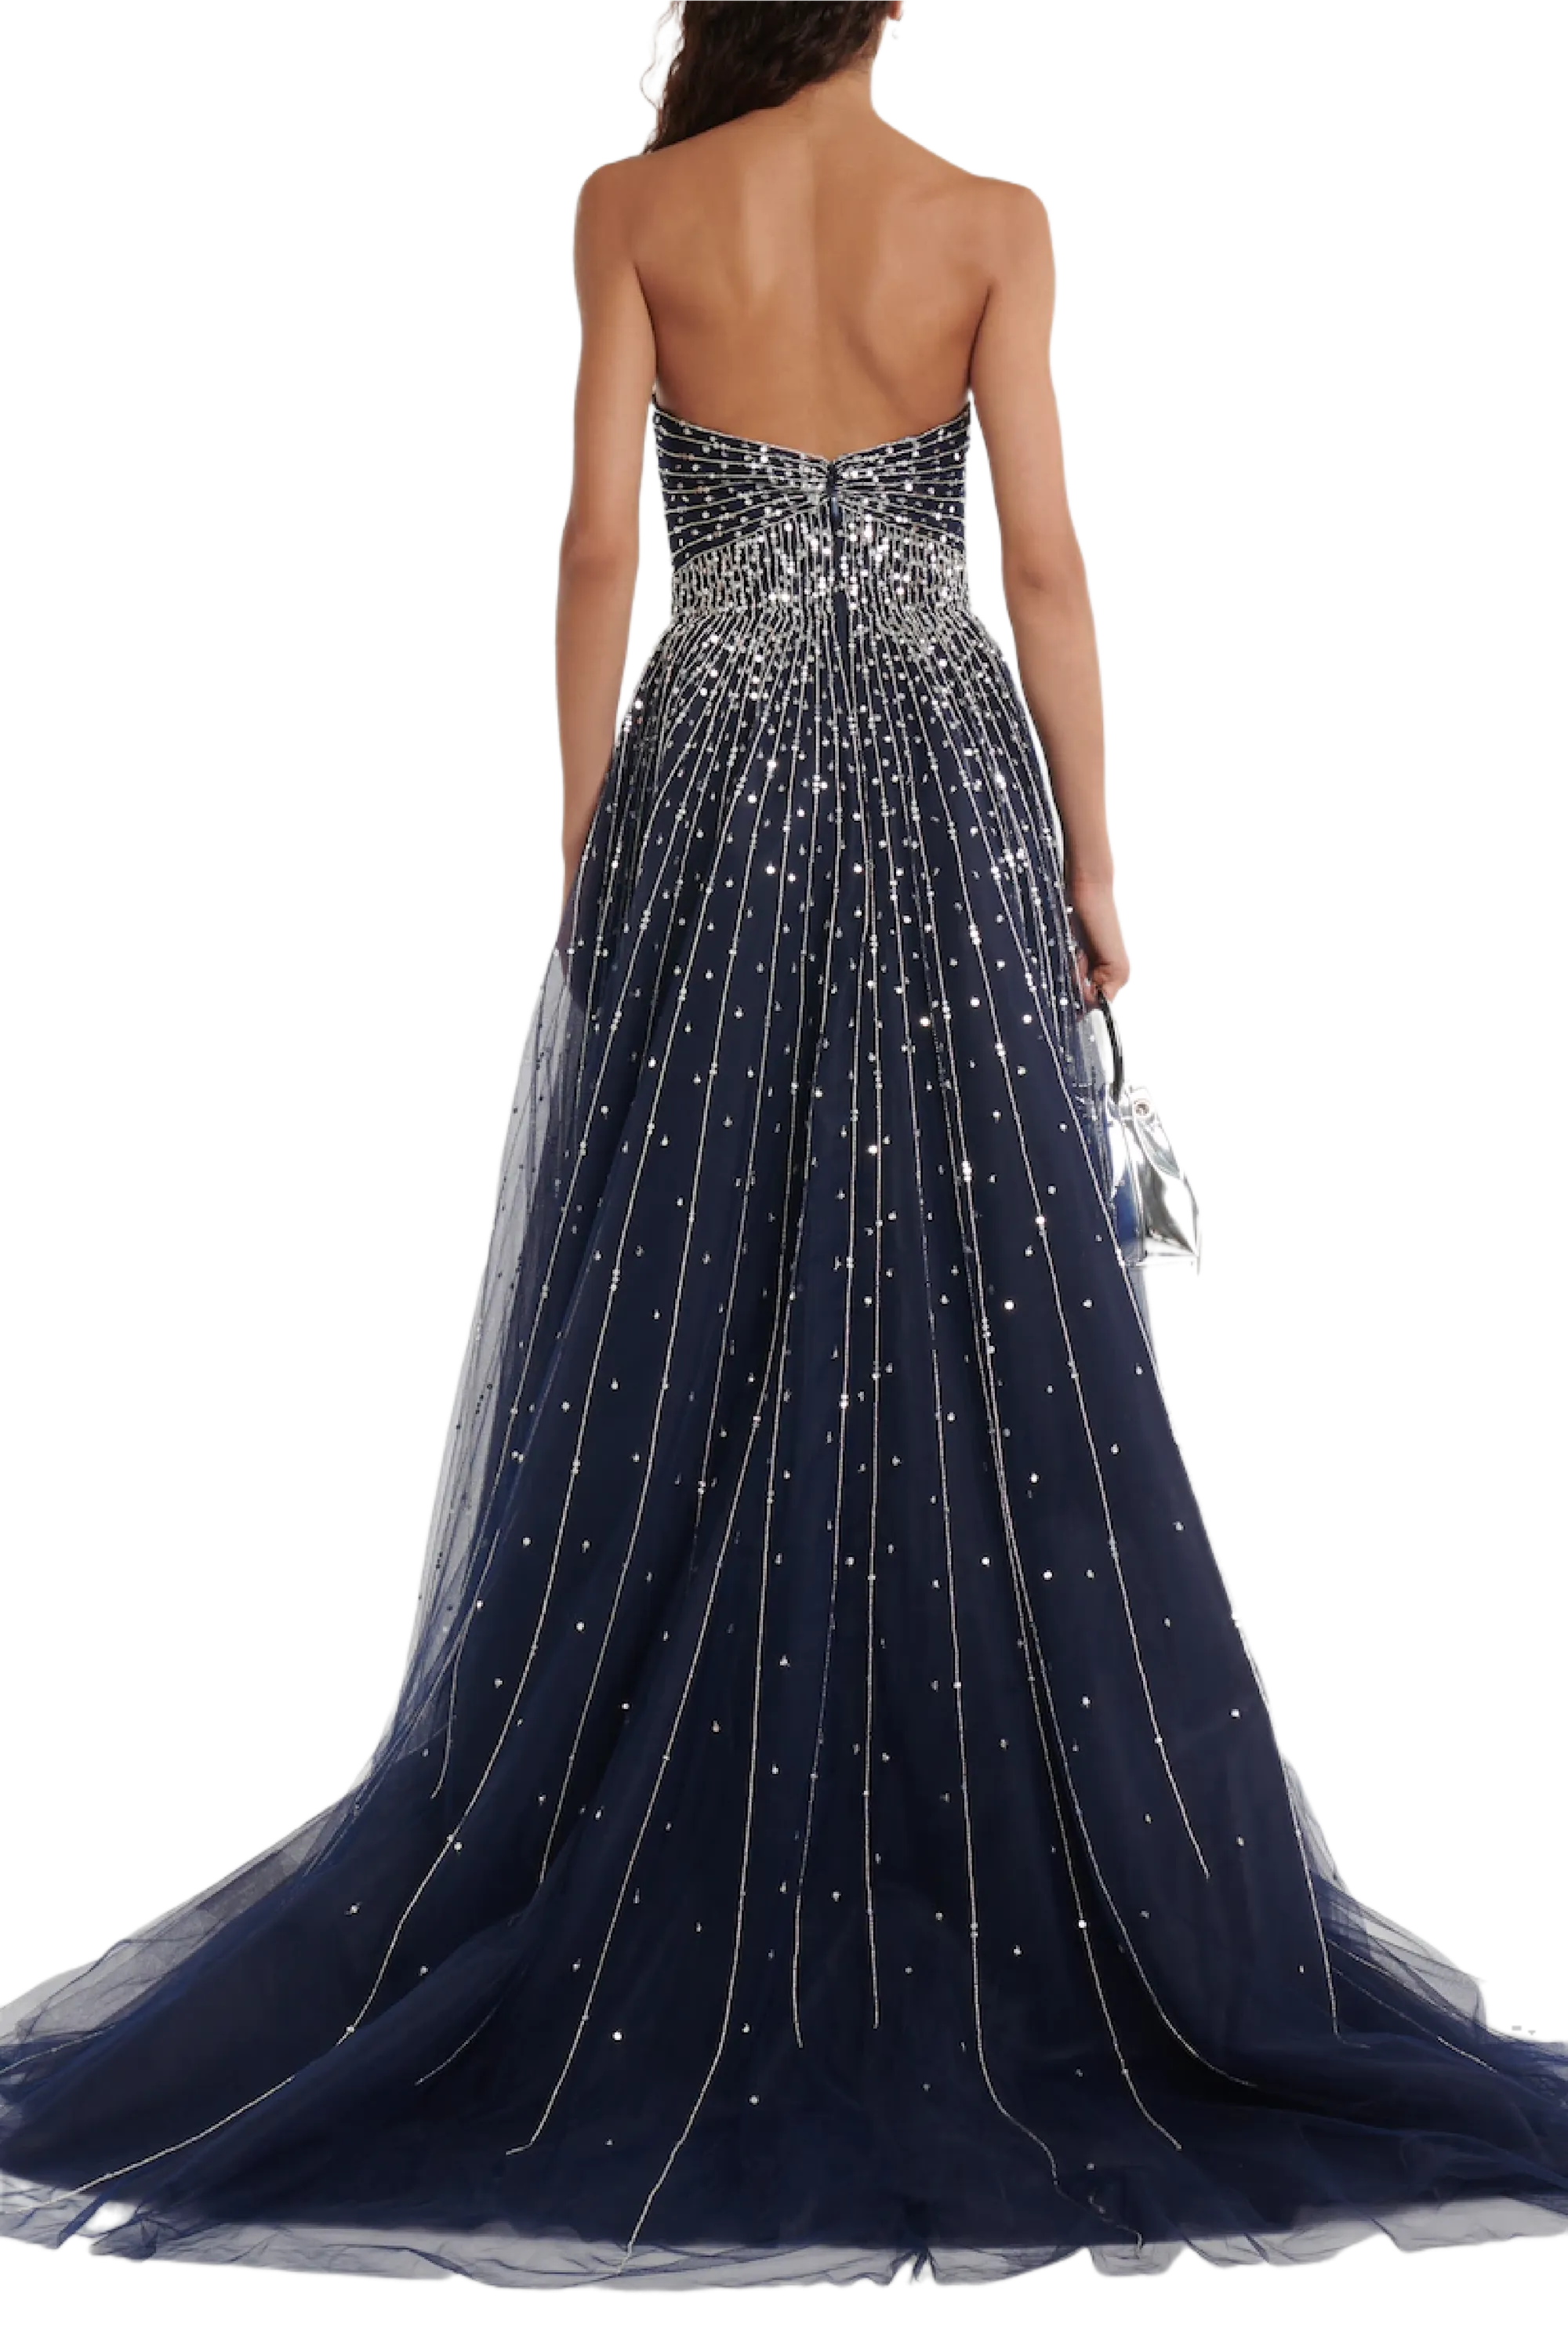 Embellished Strapless Ball Gown